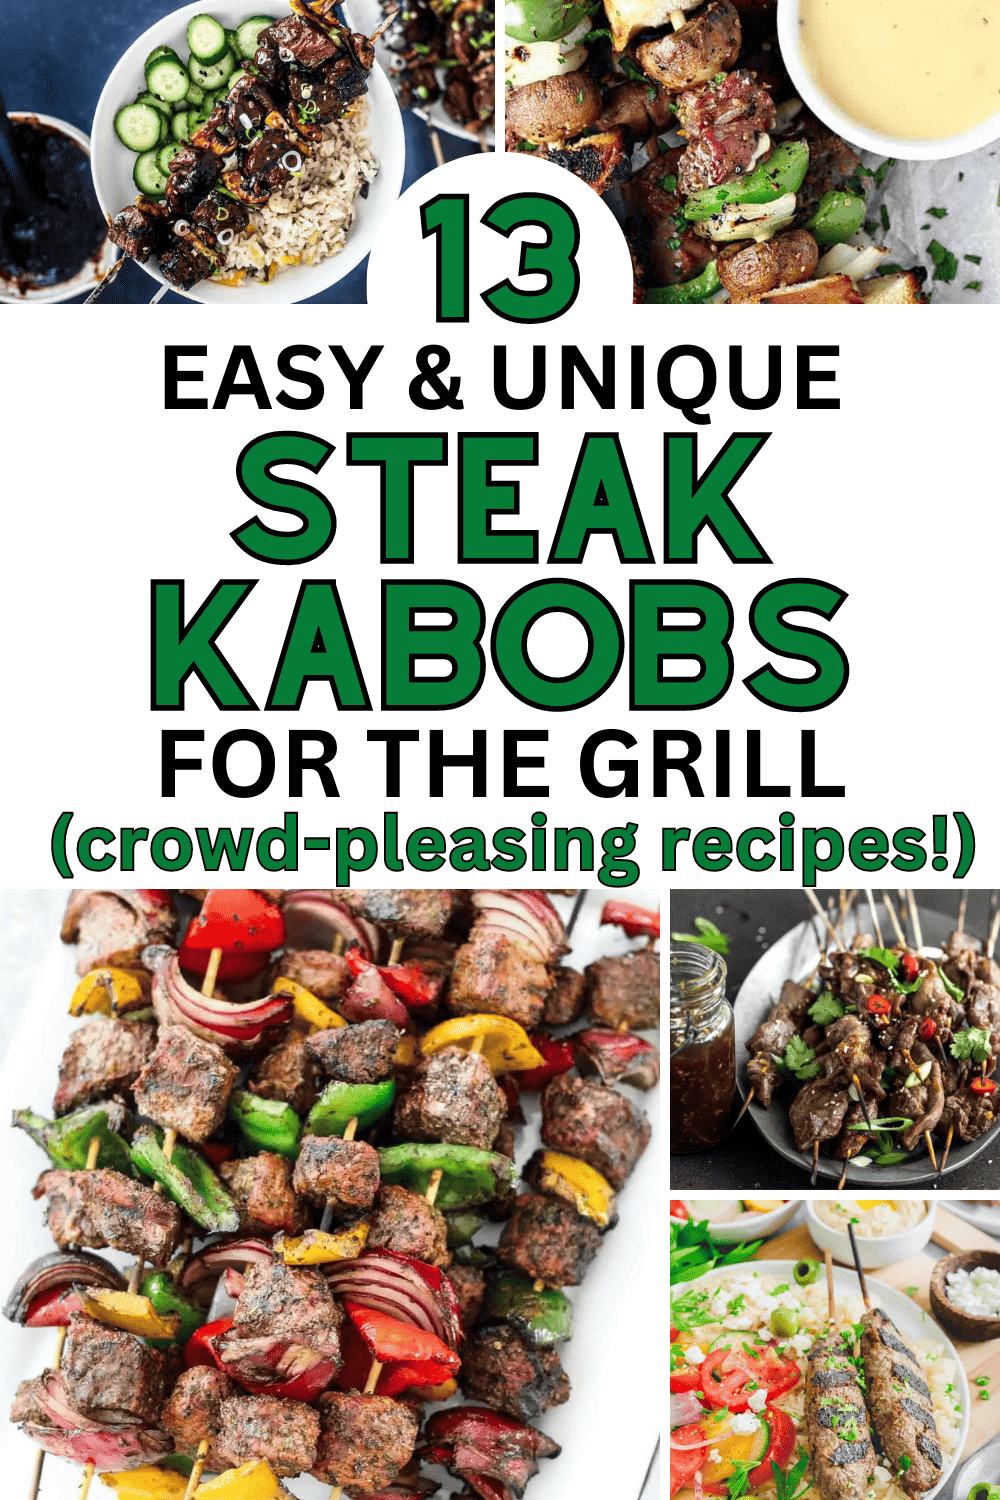 You'll make these easy steak kabob recipes on the grill on repeat all summer! Steak kebabs on the grill are a quick and easy summer dinner. Easy beef kabobs on the grill, shrimp and steak kabobs on the grill skewers, grilled steak kabob recipes, marinade for steak kabobs on the grill, how to grill shish kabobs, marinated grilled steak skewers recipes, beef shish kabobs marinade recipes, chicken and steak kabobs on the grill, easy teriyaki steak kabobs on the grill marinade recipes, beef skewers.